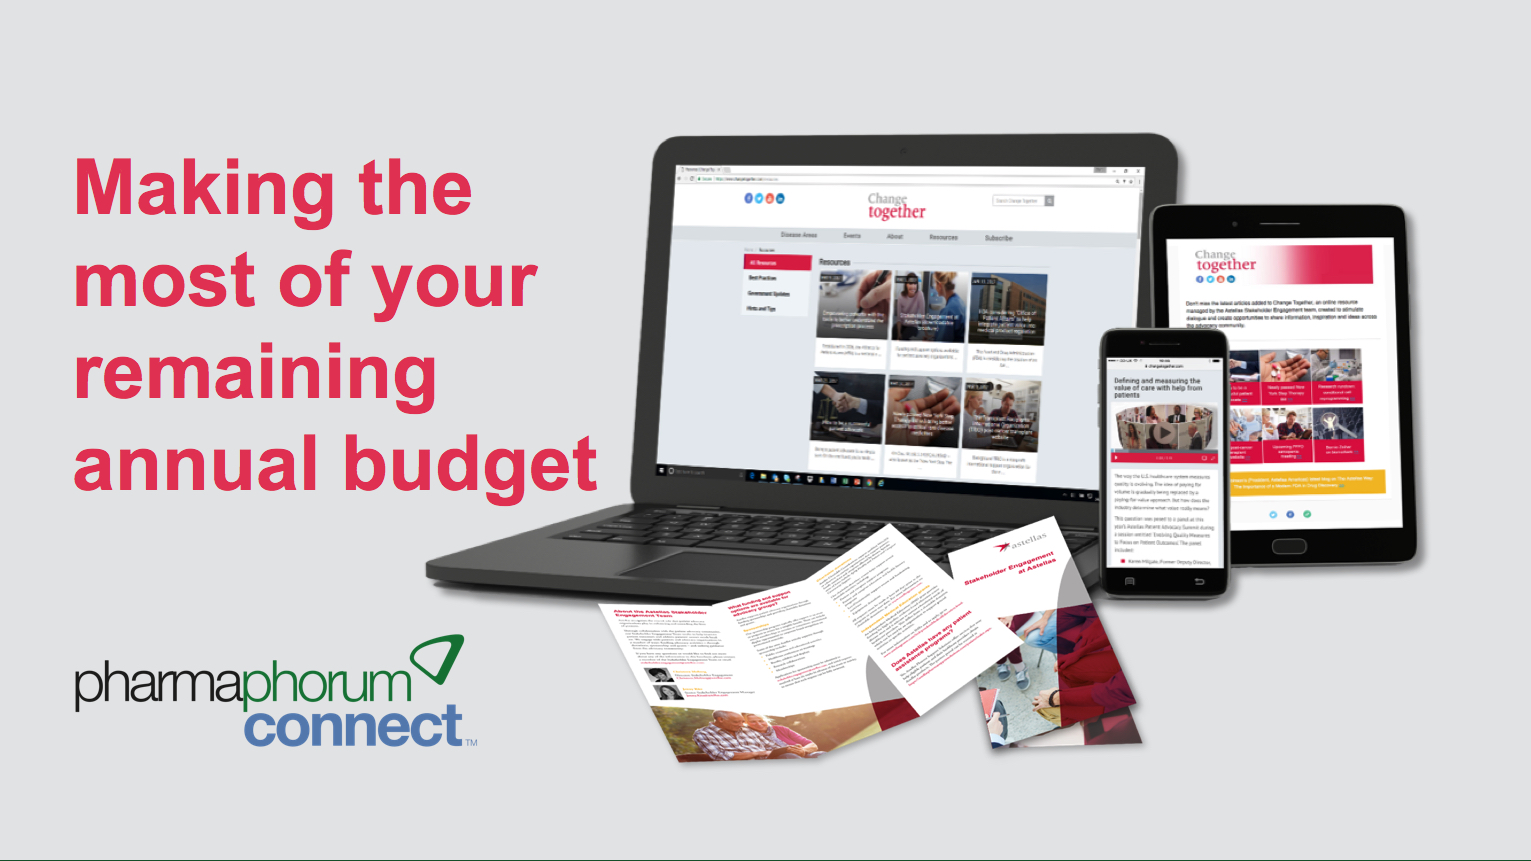 Making the most of your remaining annual budget.